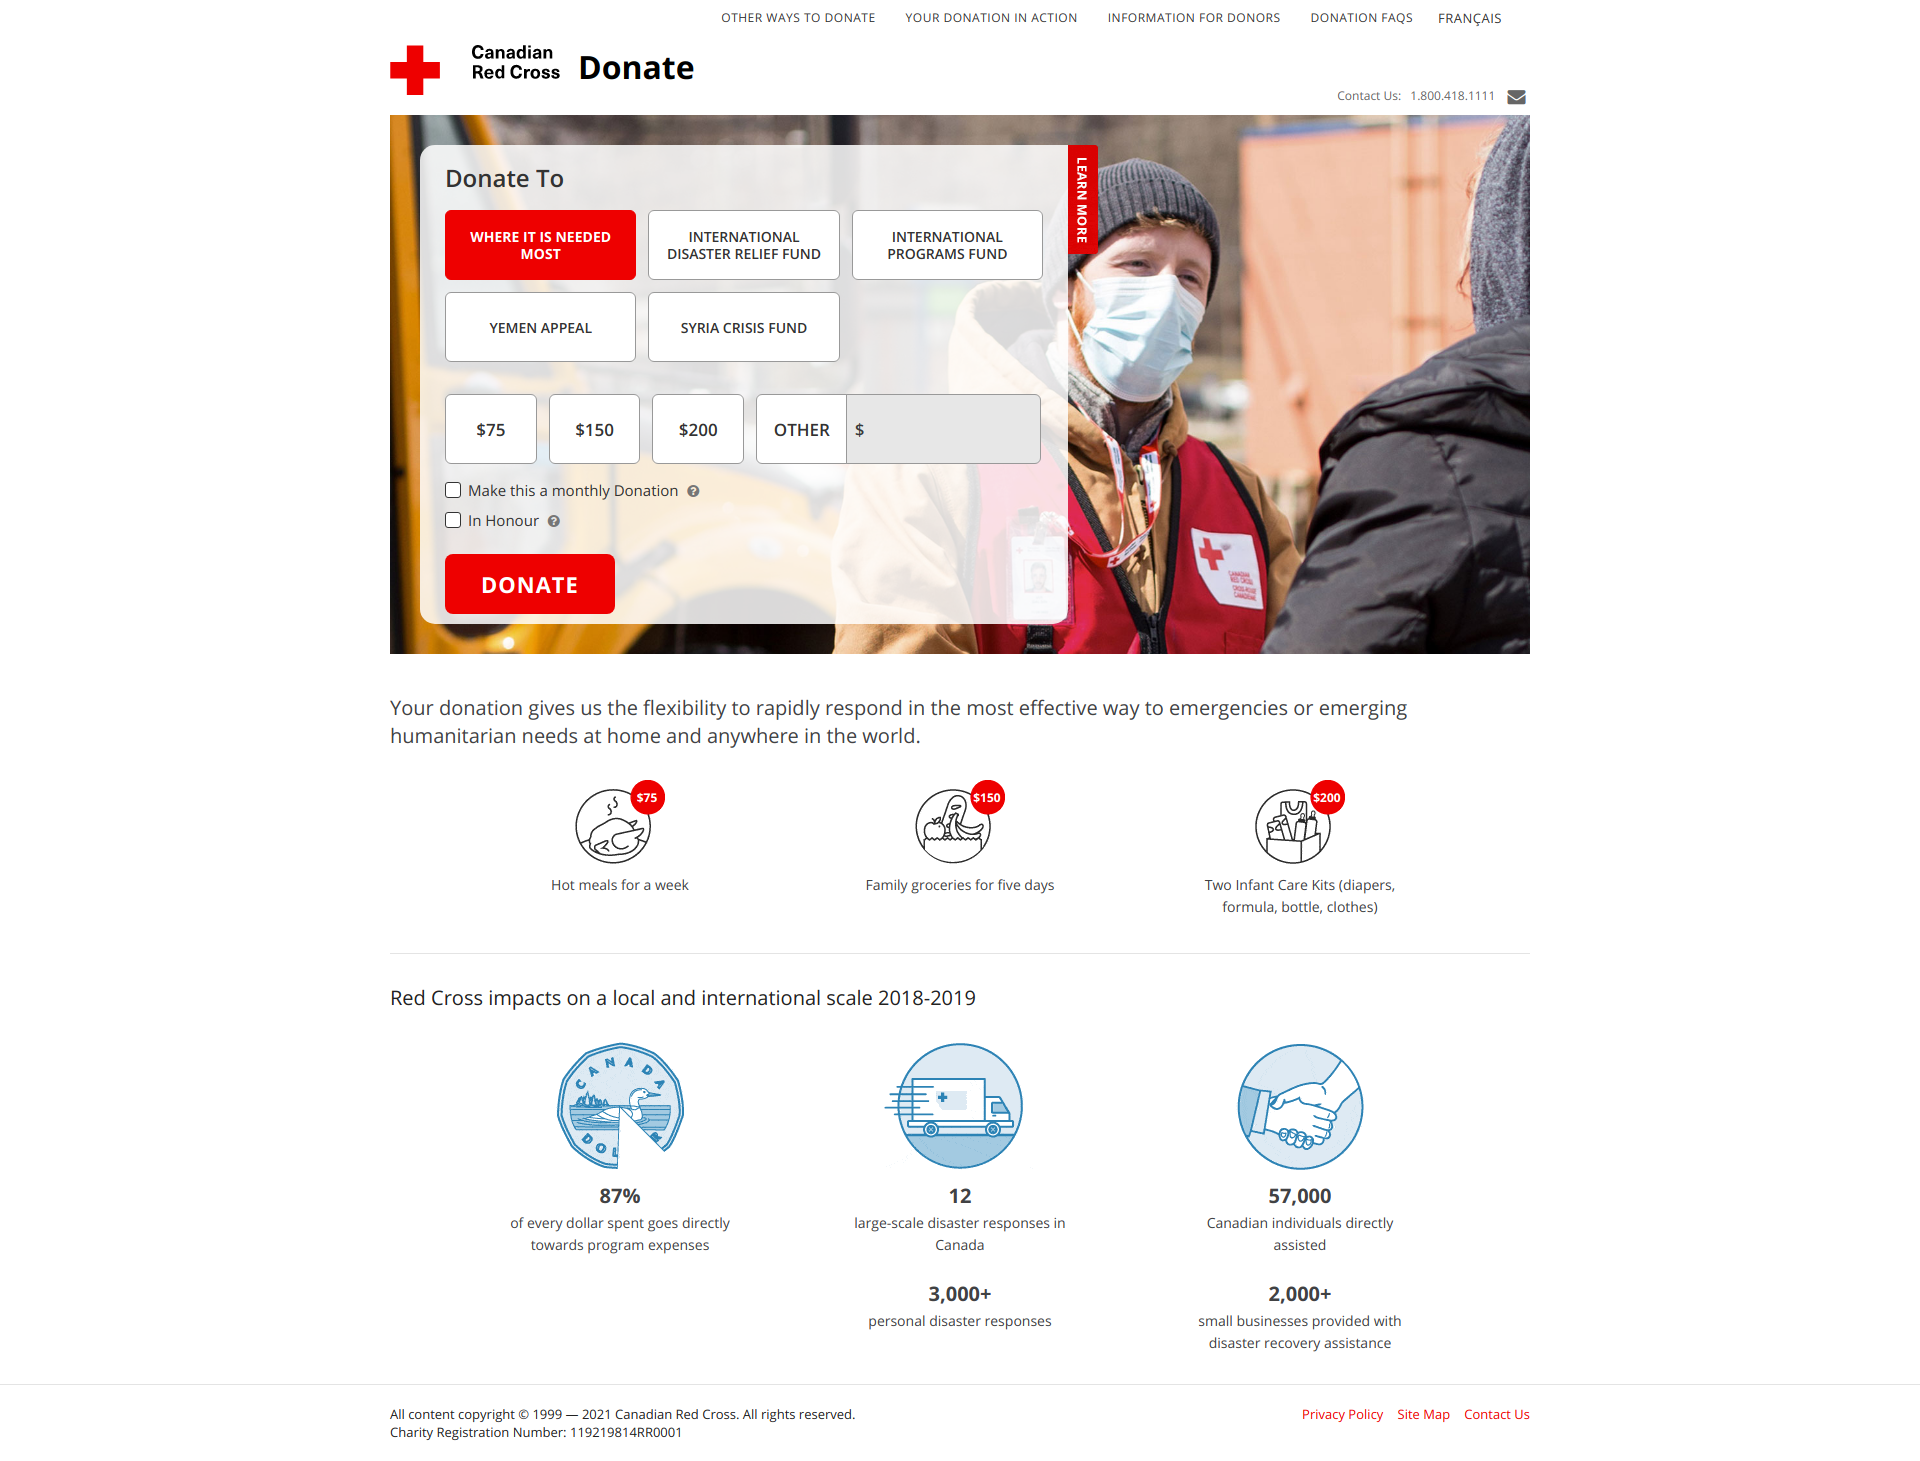 Canadian Red Cross Fundraising Campaign